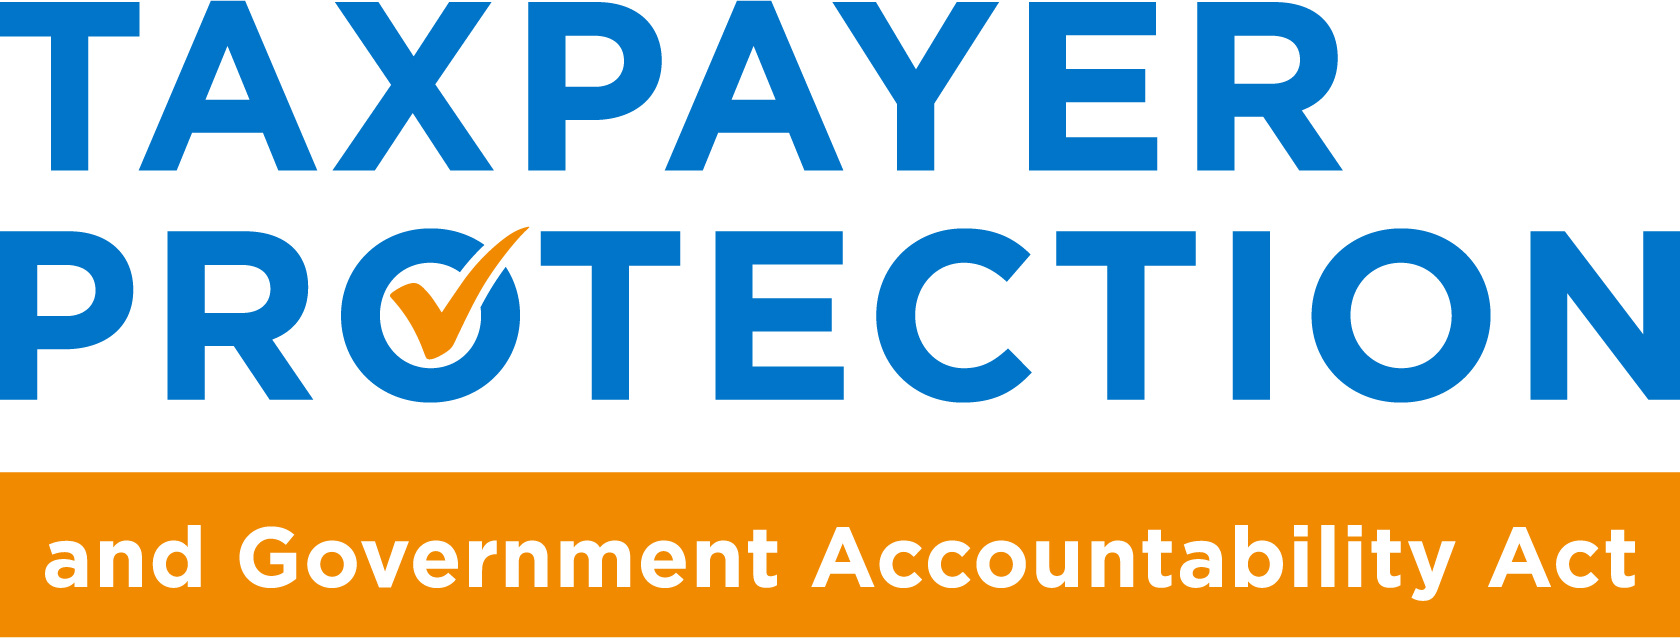 Taxpayer Protection and Government Accountability Act